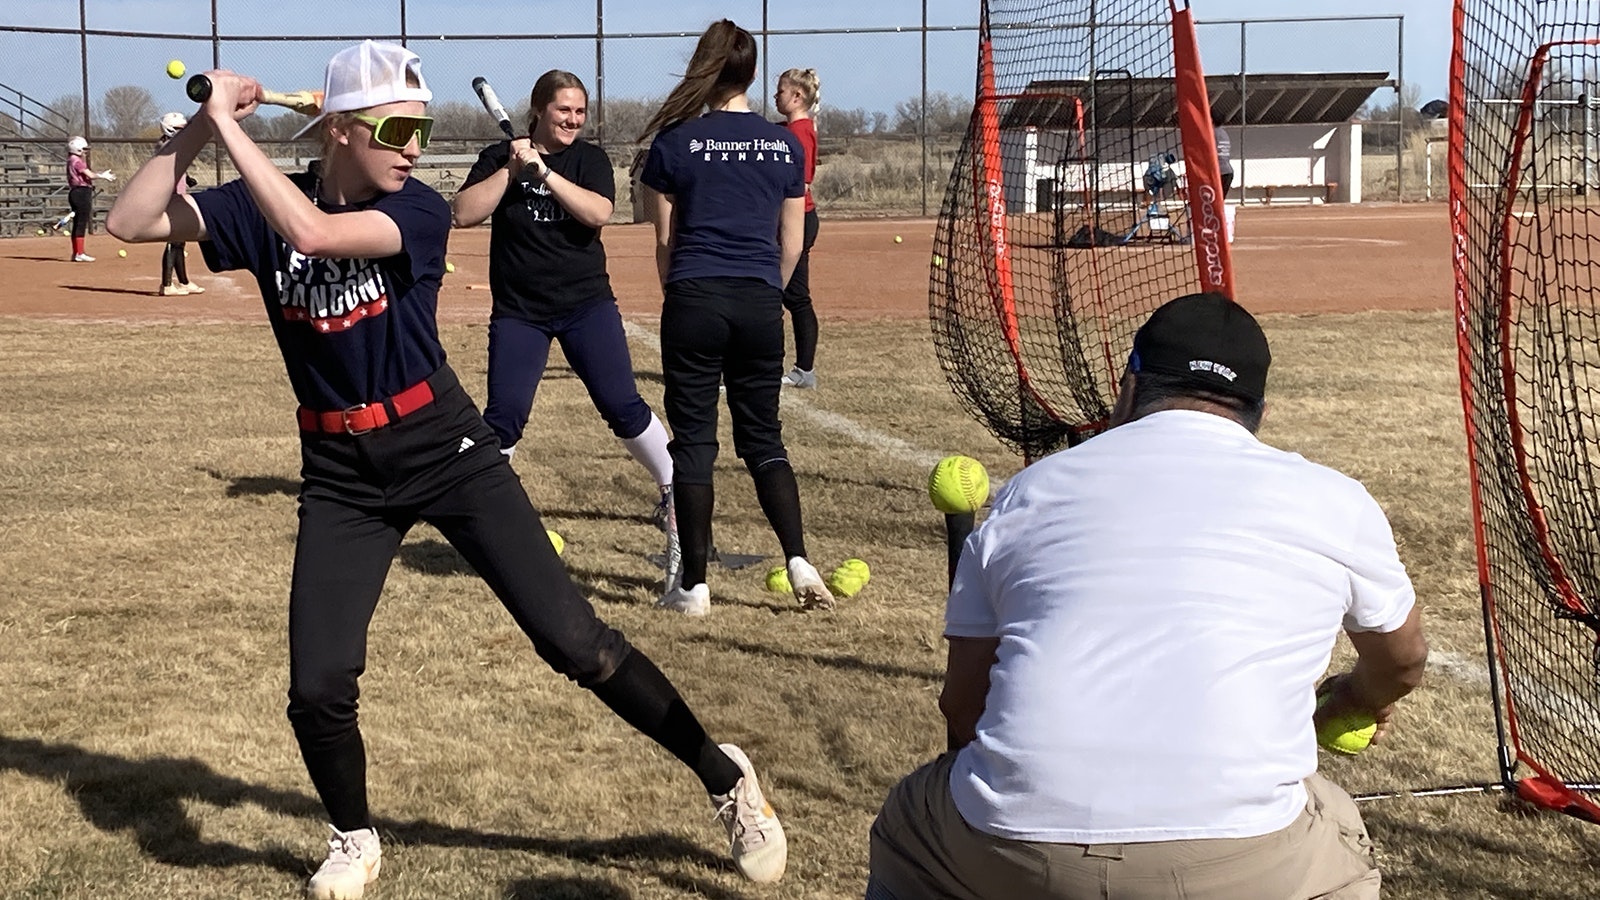 Riverton High School senior Cassy Miller practices Monday with the World High girls softball team. Miller and 12 other players from Riverton, Shoshoni and Lander travel three hours every day to be part of the team